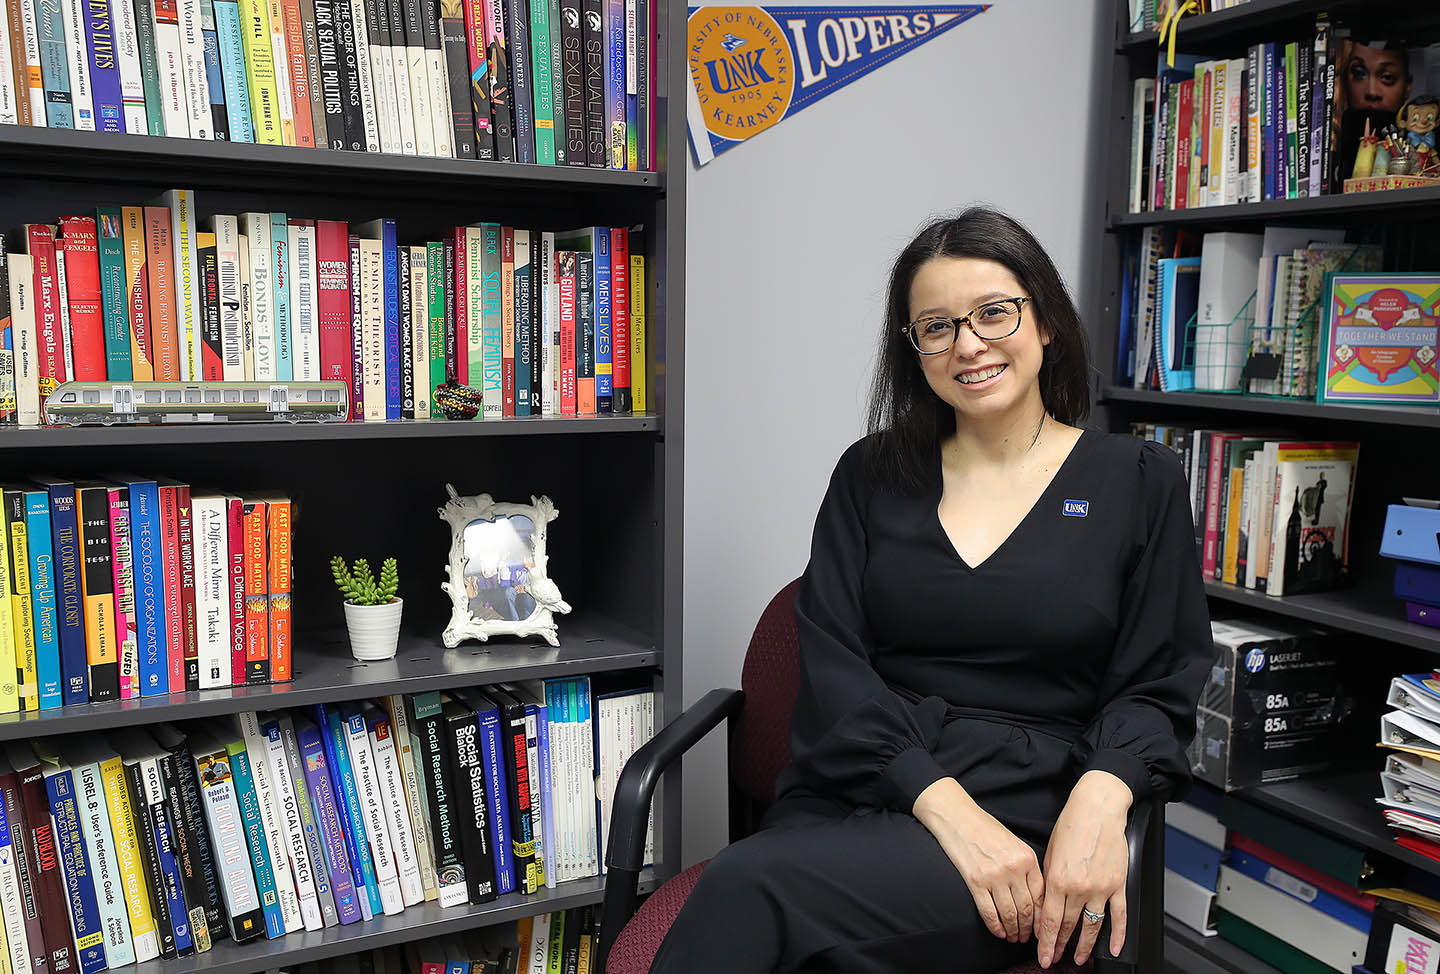 Associate sociology professor Sandra Loughrin is the first female minority to serve as director of UNK’s women’s, gender and ethnic studies program. She was appointed to the position in March. (Photos by Erika Pritchard, UNK Communications)